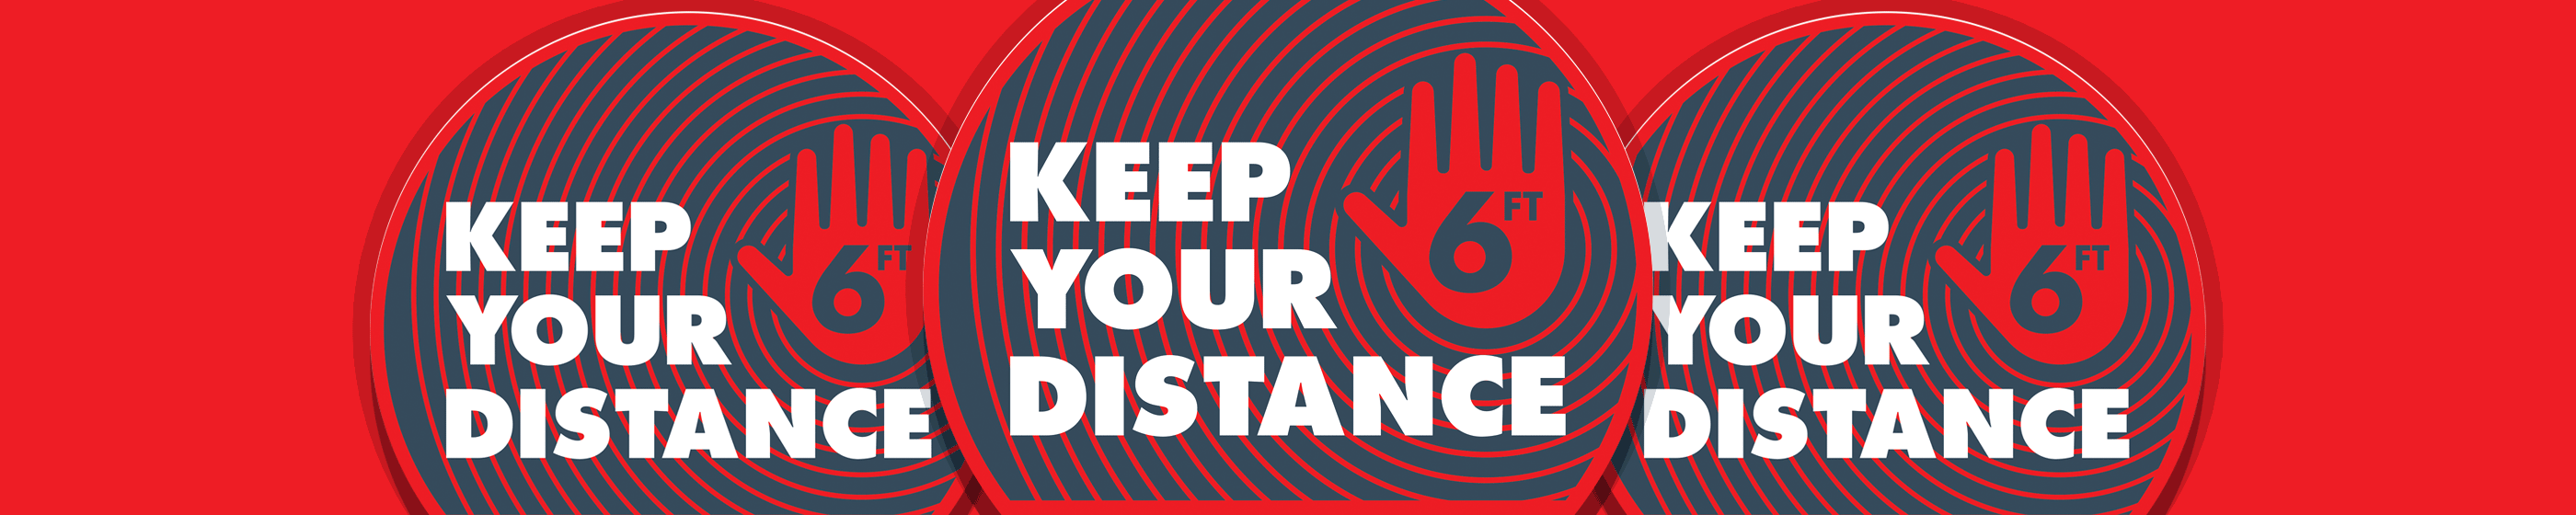 Keep Your Distance Button Box Cover Image